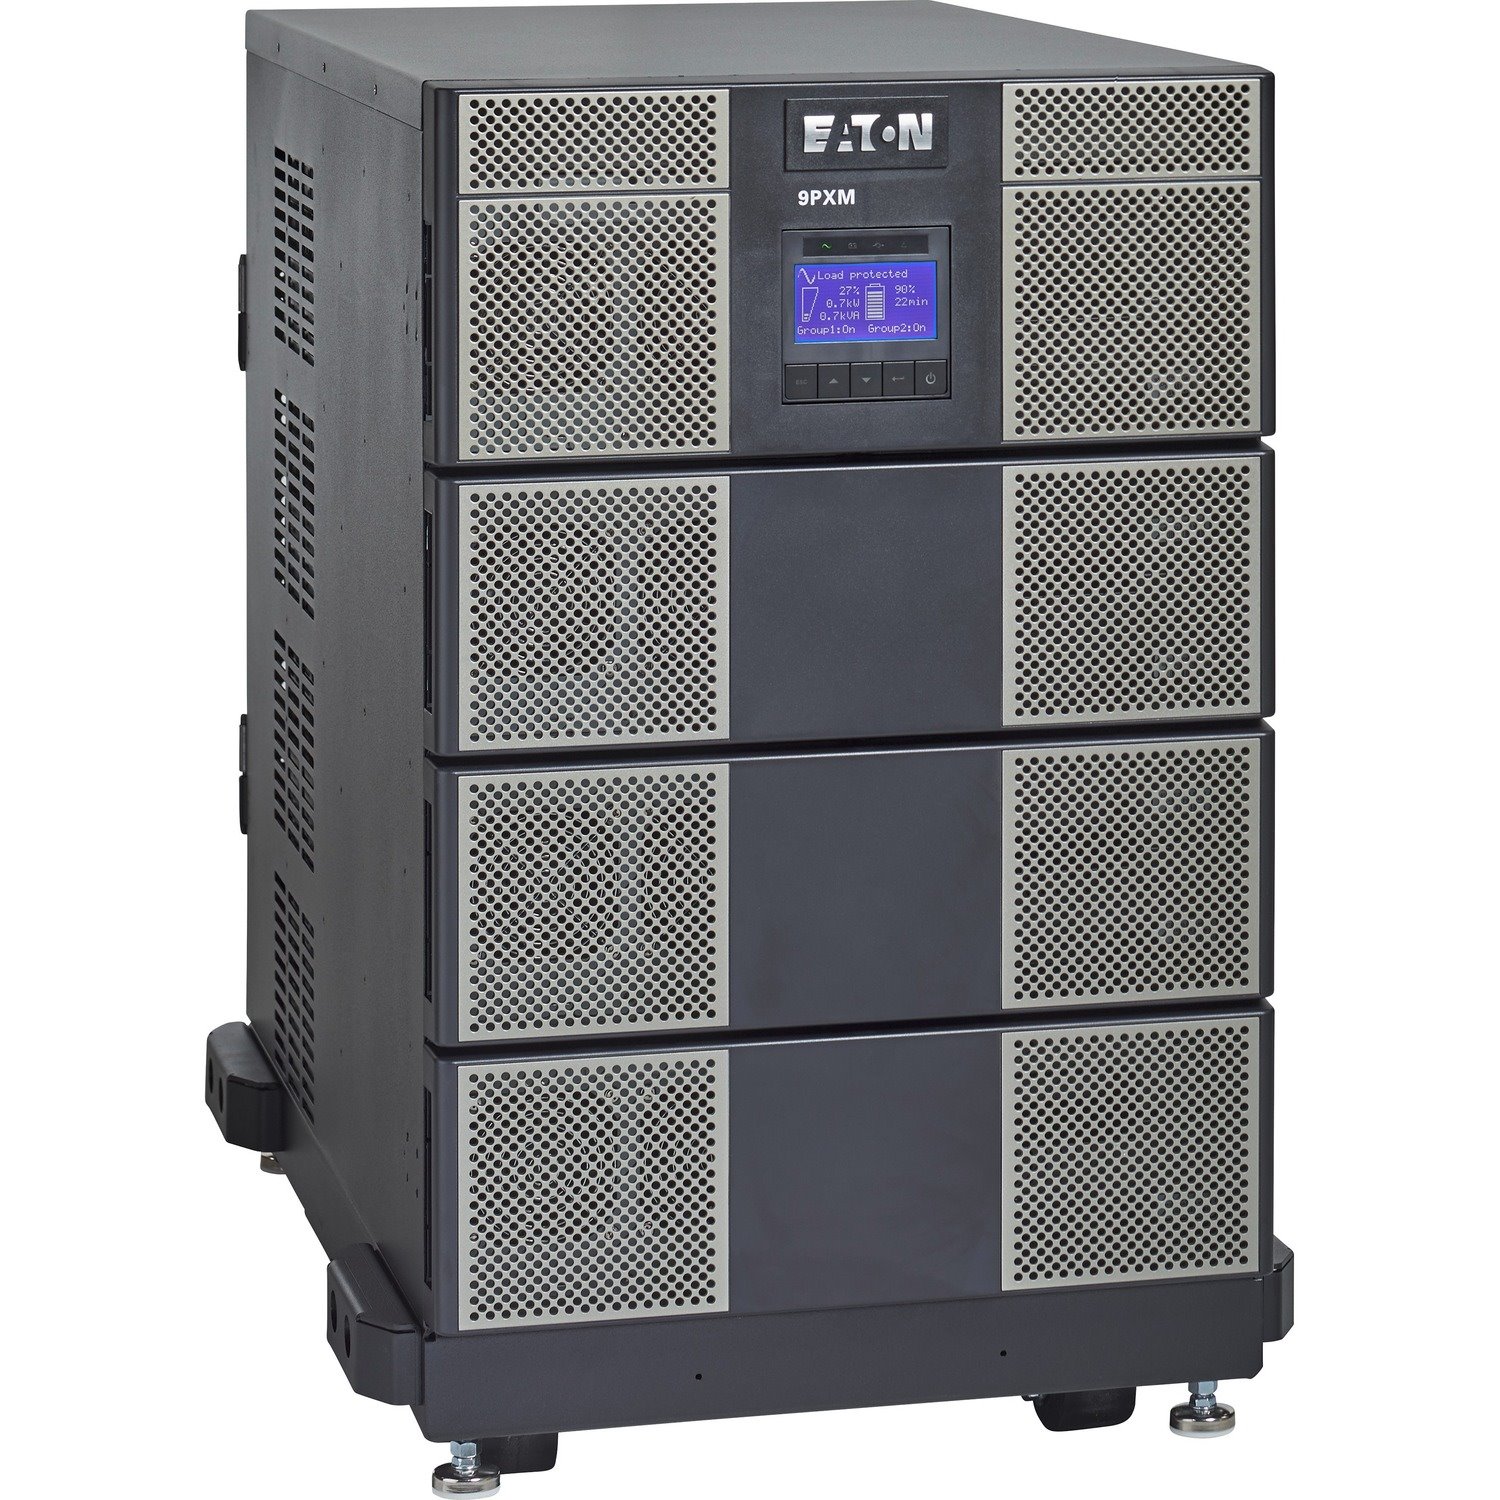 Eaton 9PXM 8kVA 7.2kW 208-240V Modular Scalable Online Double-Conversion UPS, Hardwired Input / Output, Cybersecure Network Card Included, 14U, TAA - Battery Backup